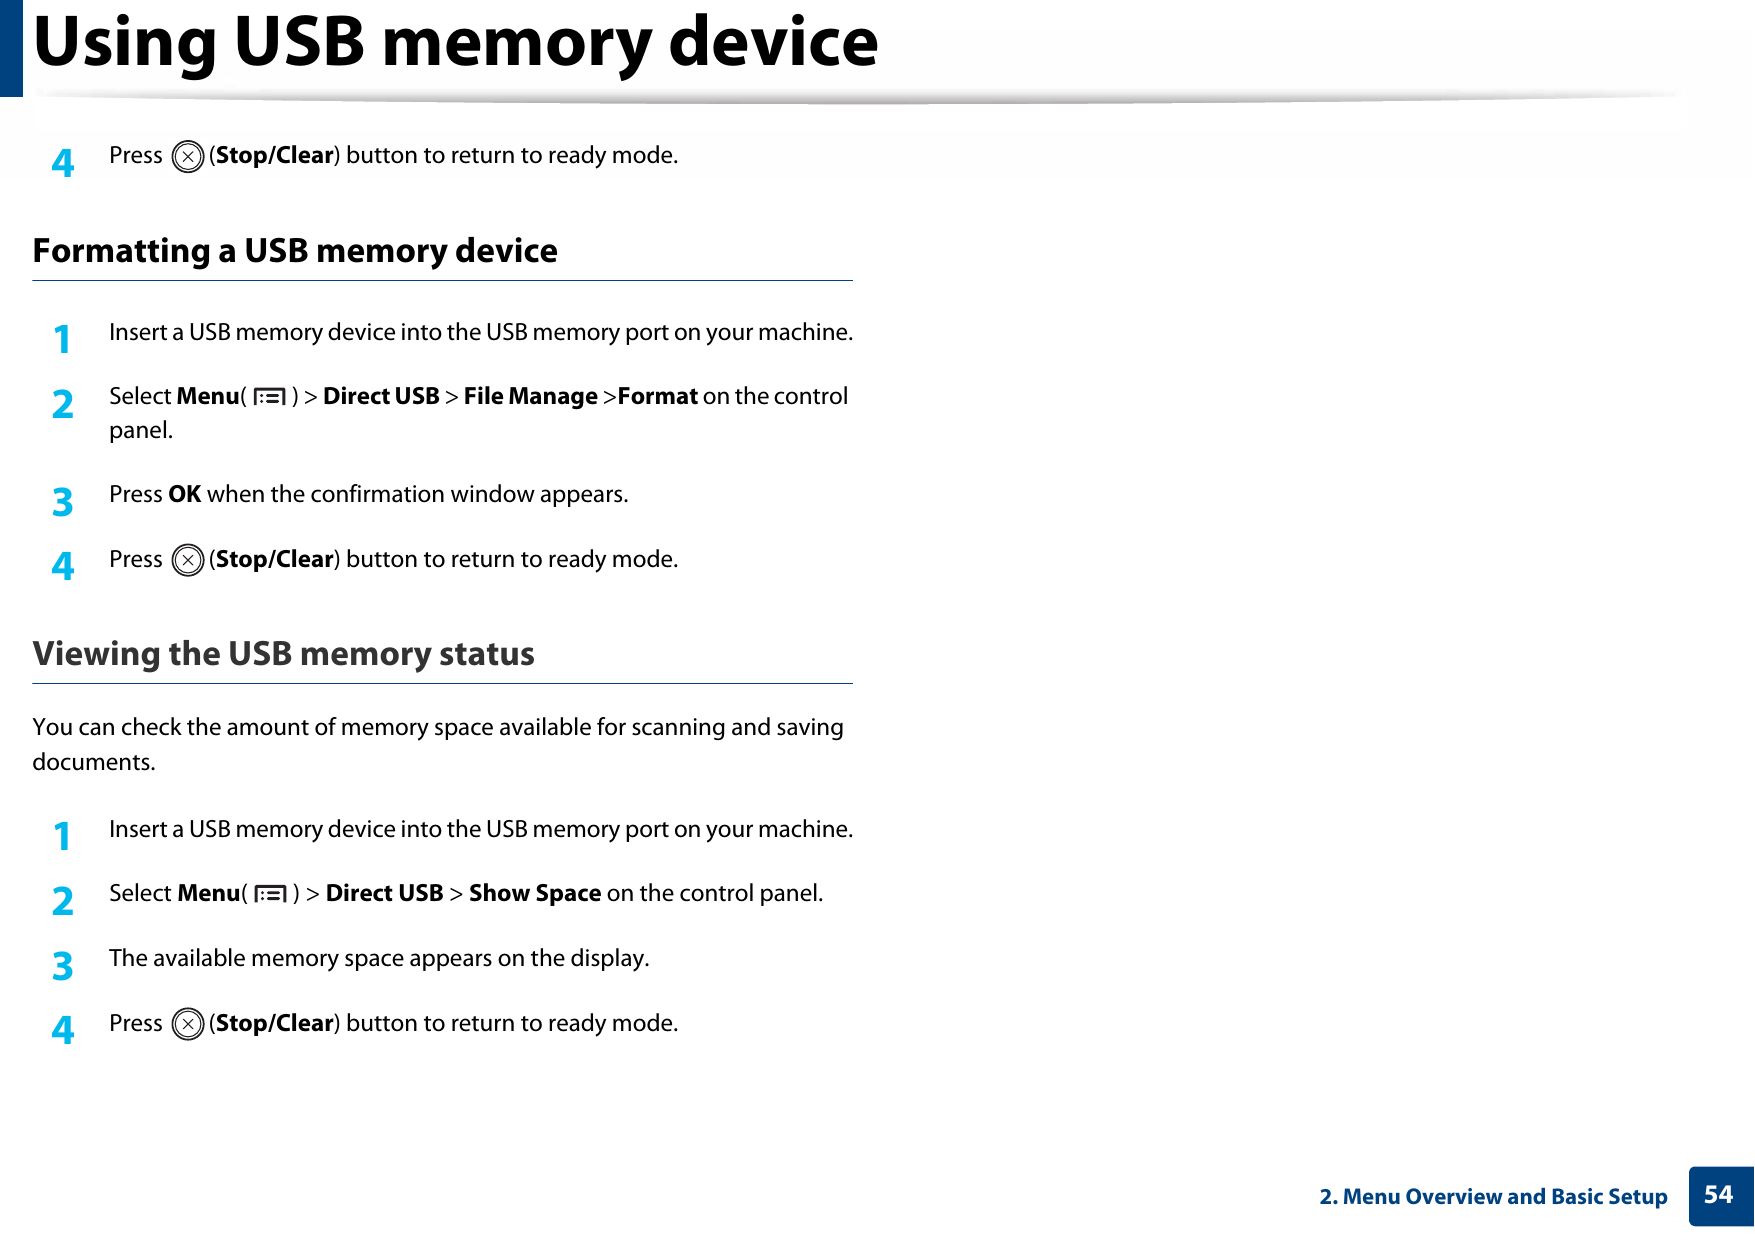 Using USB memory device542. Menu Overview and Basic Setup4  Press (Stop/Clear) button to return to ready mode.Formatting a USB memory device1Insert a USB memory device into the USB memory port on your machine.2  Select Menu() &gt; Direct USB &gt; File Manage &gt;Format on the control panel.3  Press OK when the confirmation window appears.4  Press (Stop/Clear) button to return to ready mode.Viewing the USB memory statusYou can check the amount of memory space available for scanning and saving documents.1Insert a USB memory device into the USB memory port on your machine.2  Select Menu() &gt; Direct USB &gt; Show Space on the control panel.3  The available memory space appears on the display.4  Press (Stop/Clear) button to return to ready mode.